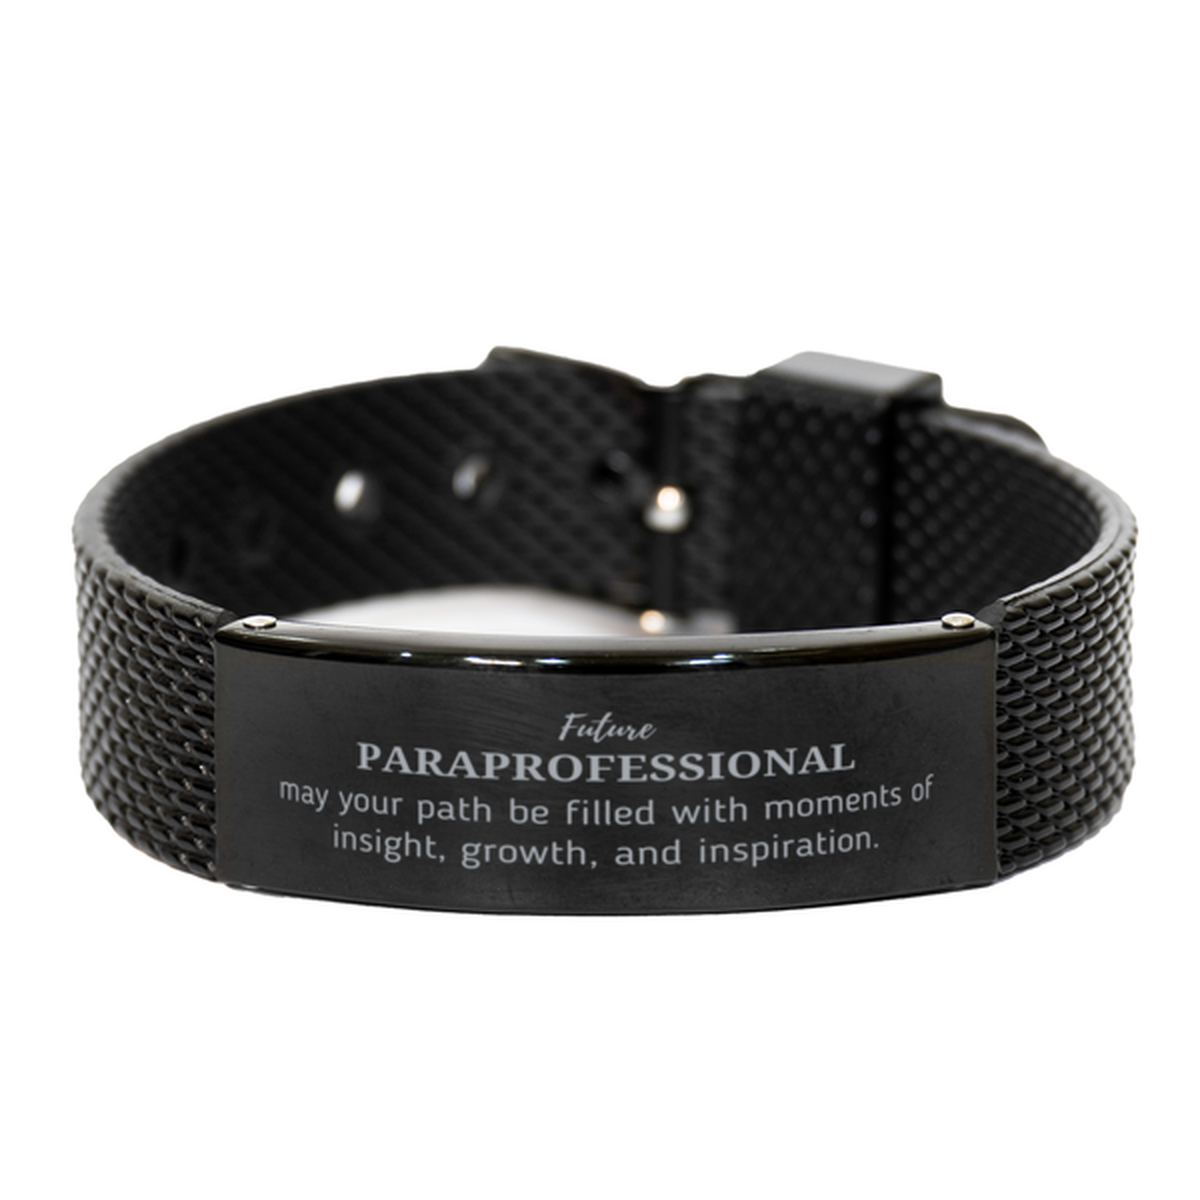 Future Paraprofessional Gifts, May your path be filled with moments of insight, Graduation Gifts for New Paraprofessional, Christmas Unique Black Shark Mesh Bracelet For Men, Women, Friends